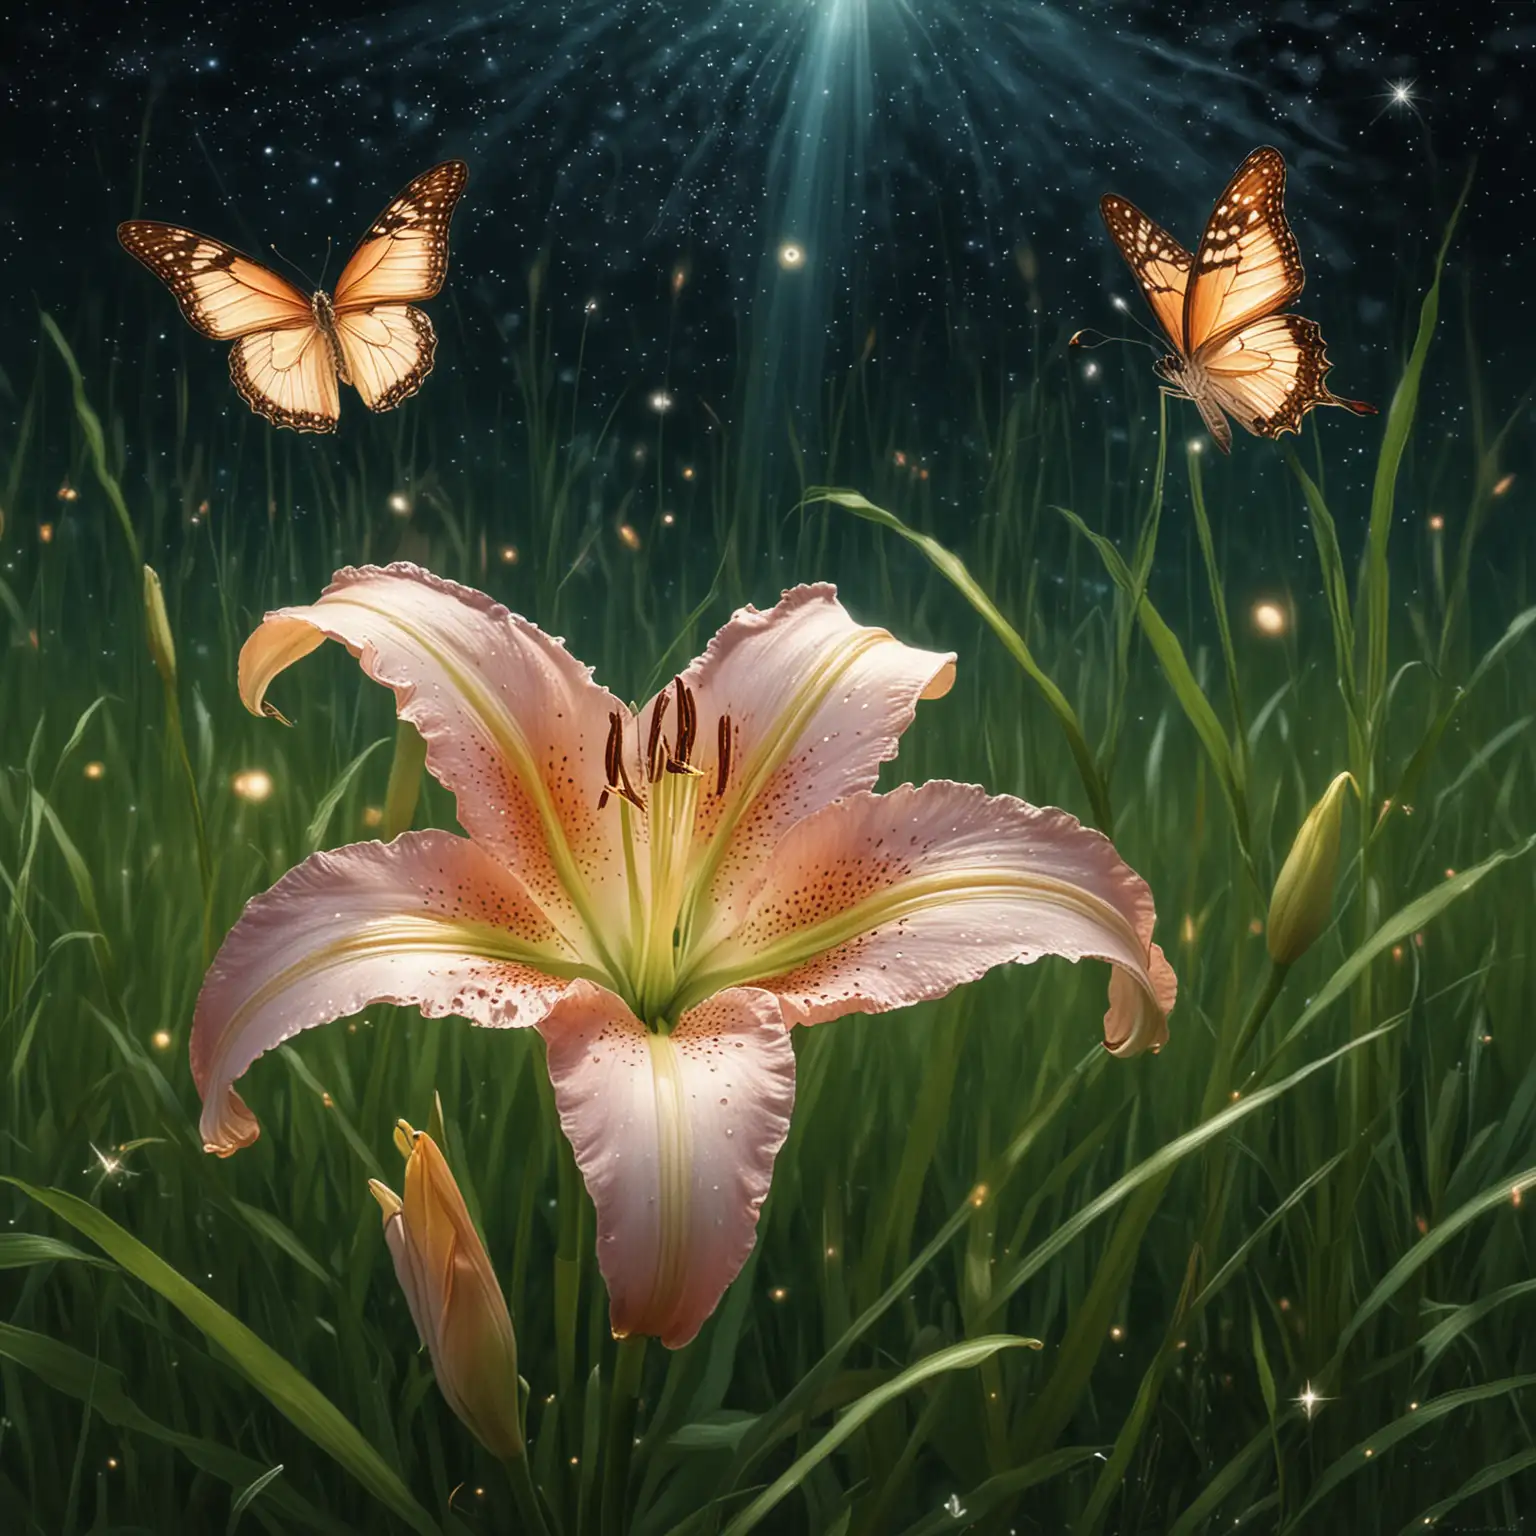 Ethereal Stargazer Lily Blossom with Butterflies in Enchanted Meadow